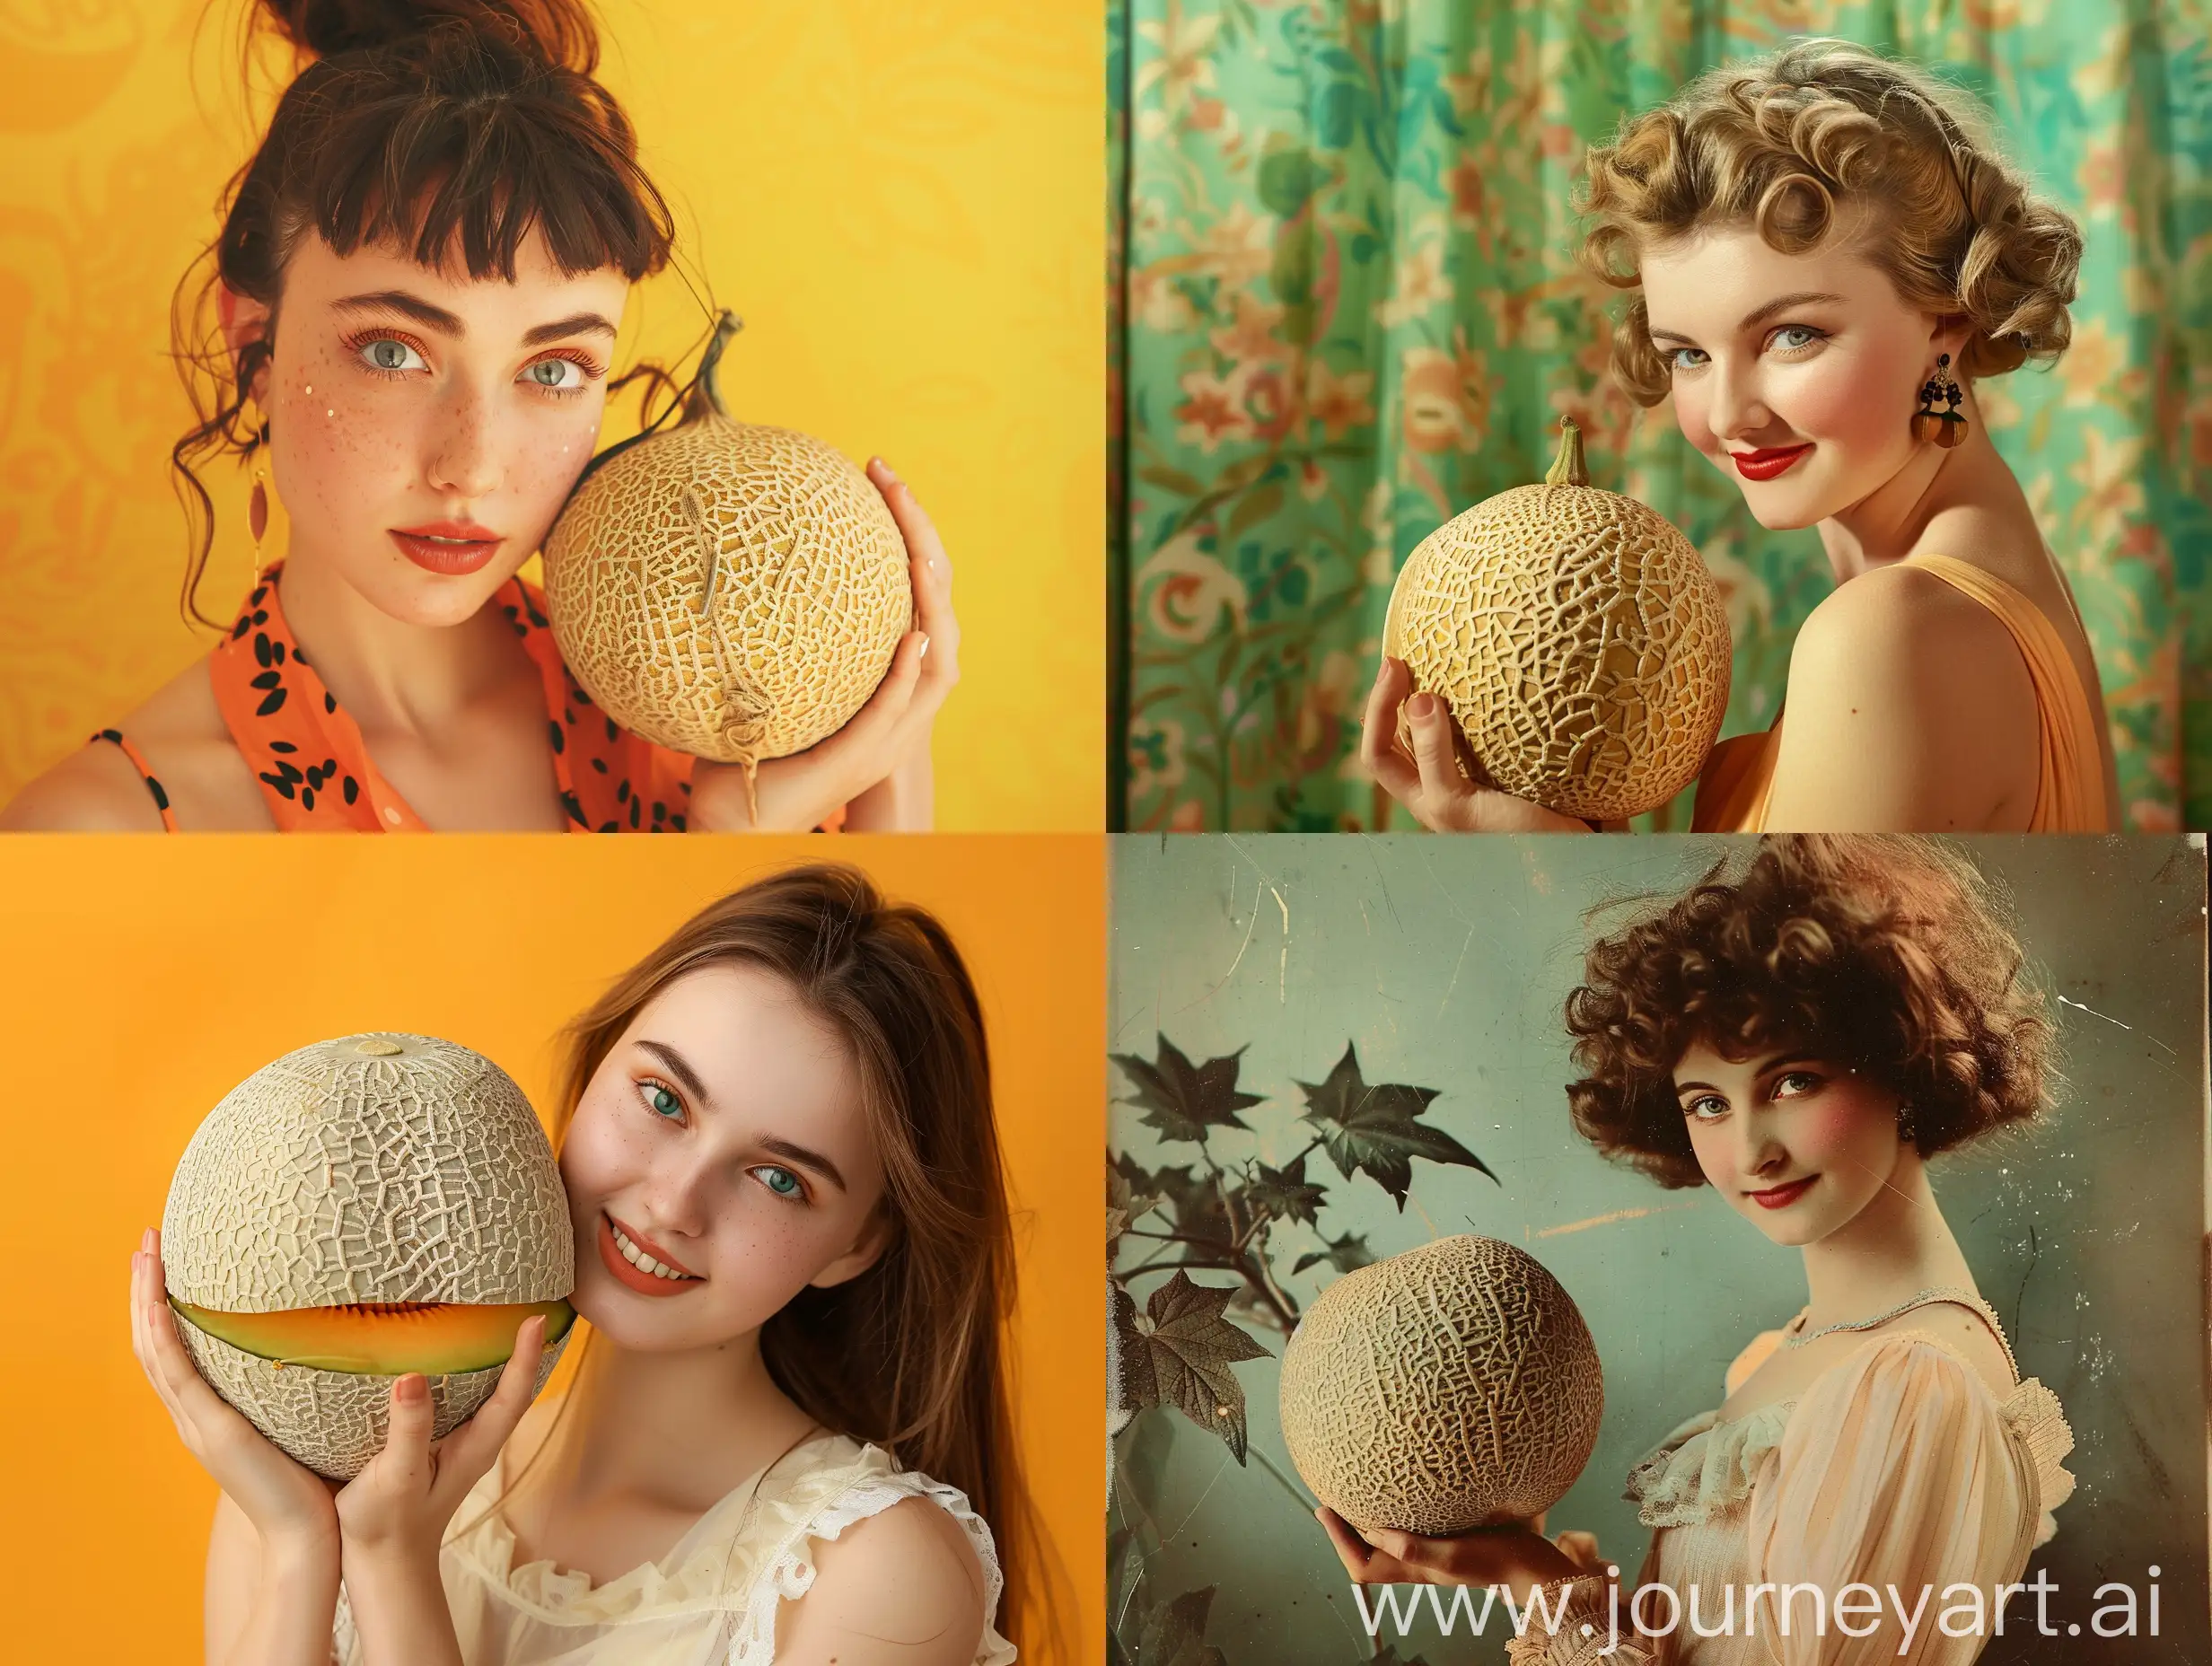 An attractive advertising photo of a lady holding a cantaloupe